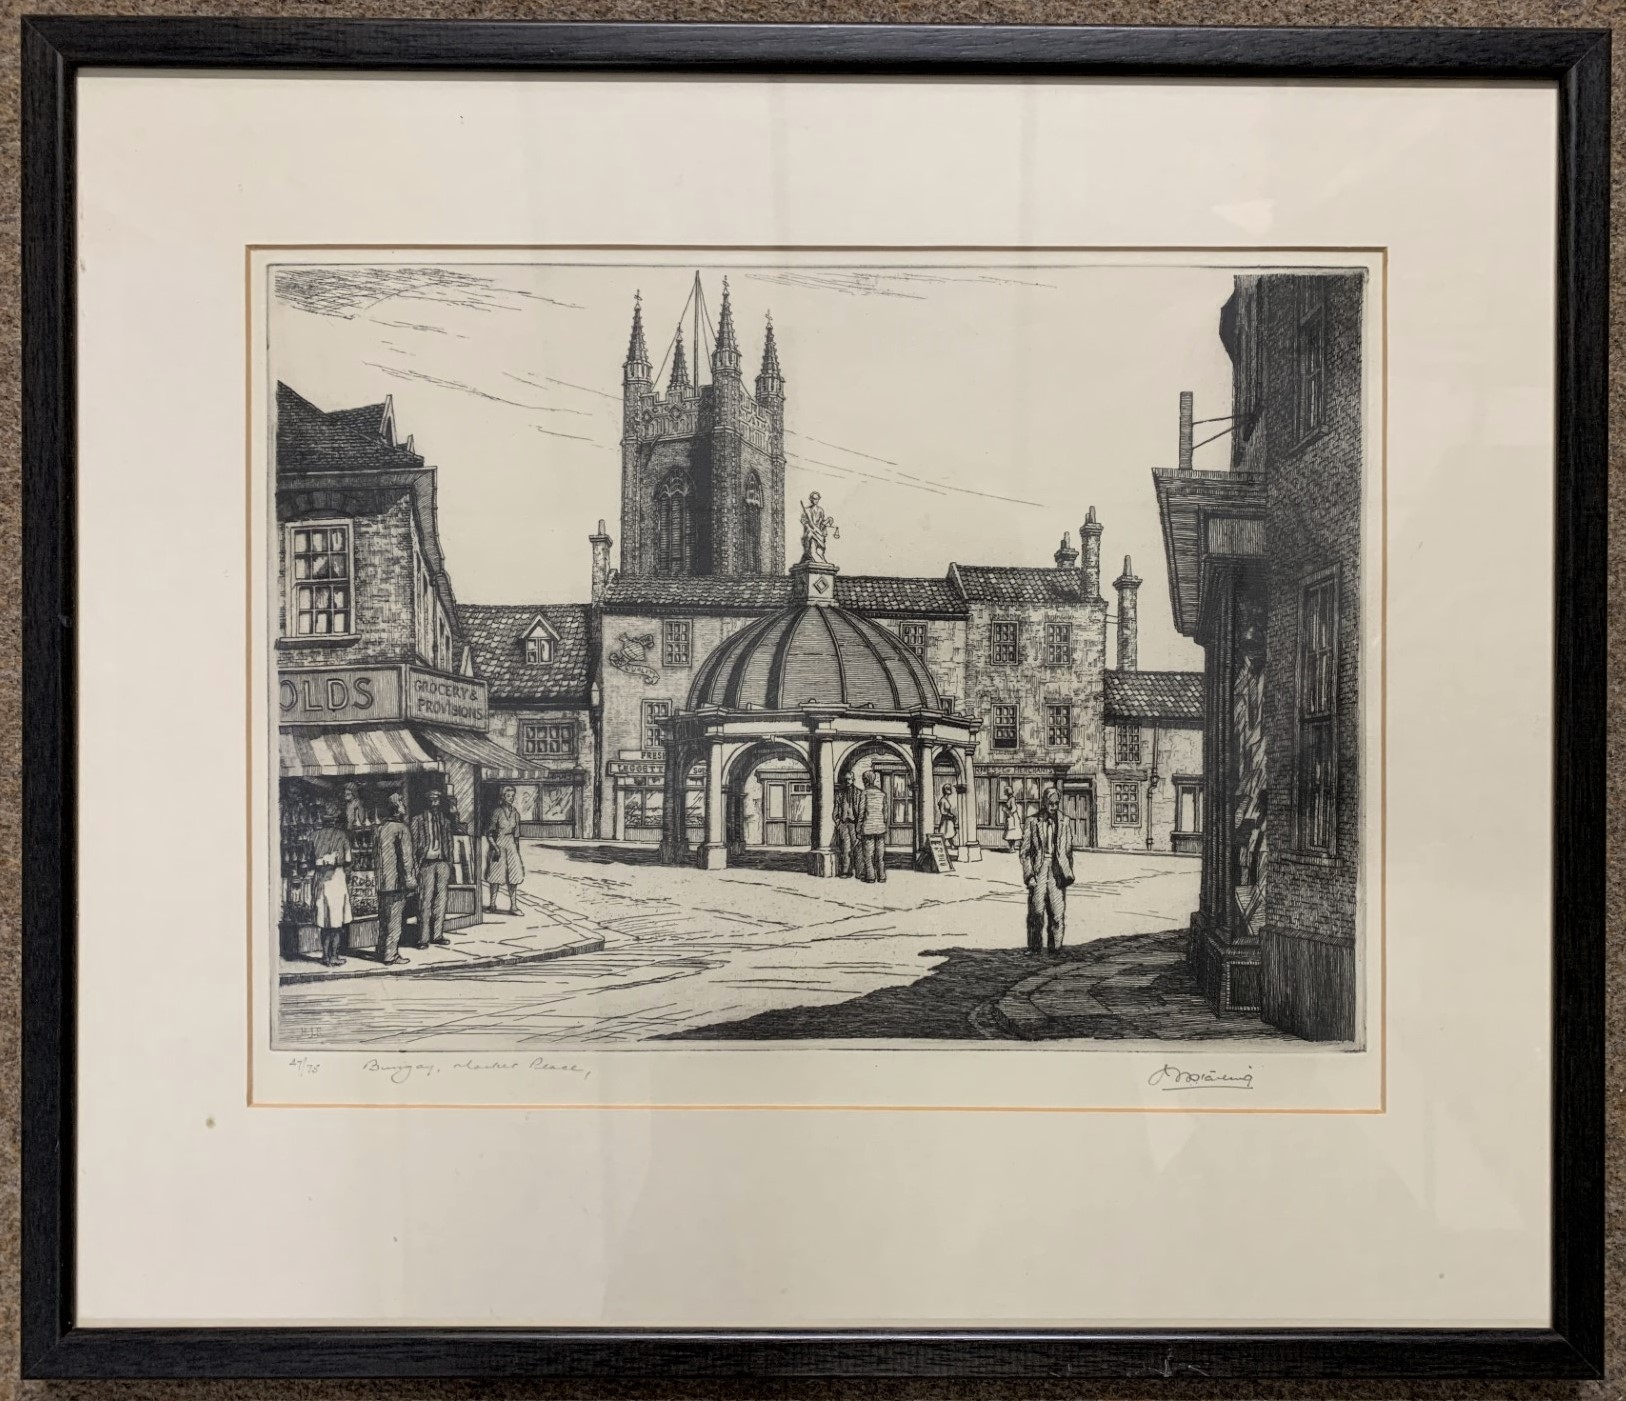 Bungay, Market Place - Henry James Starling